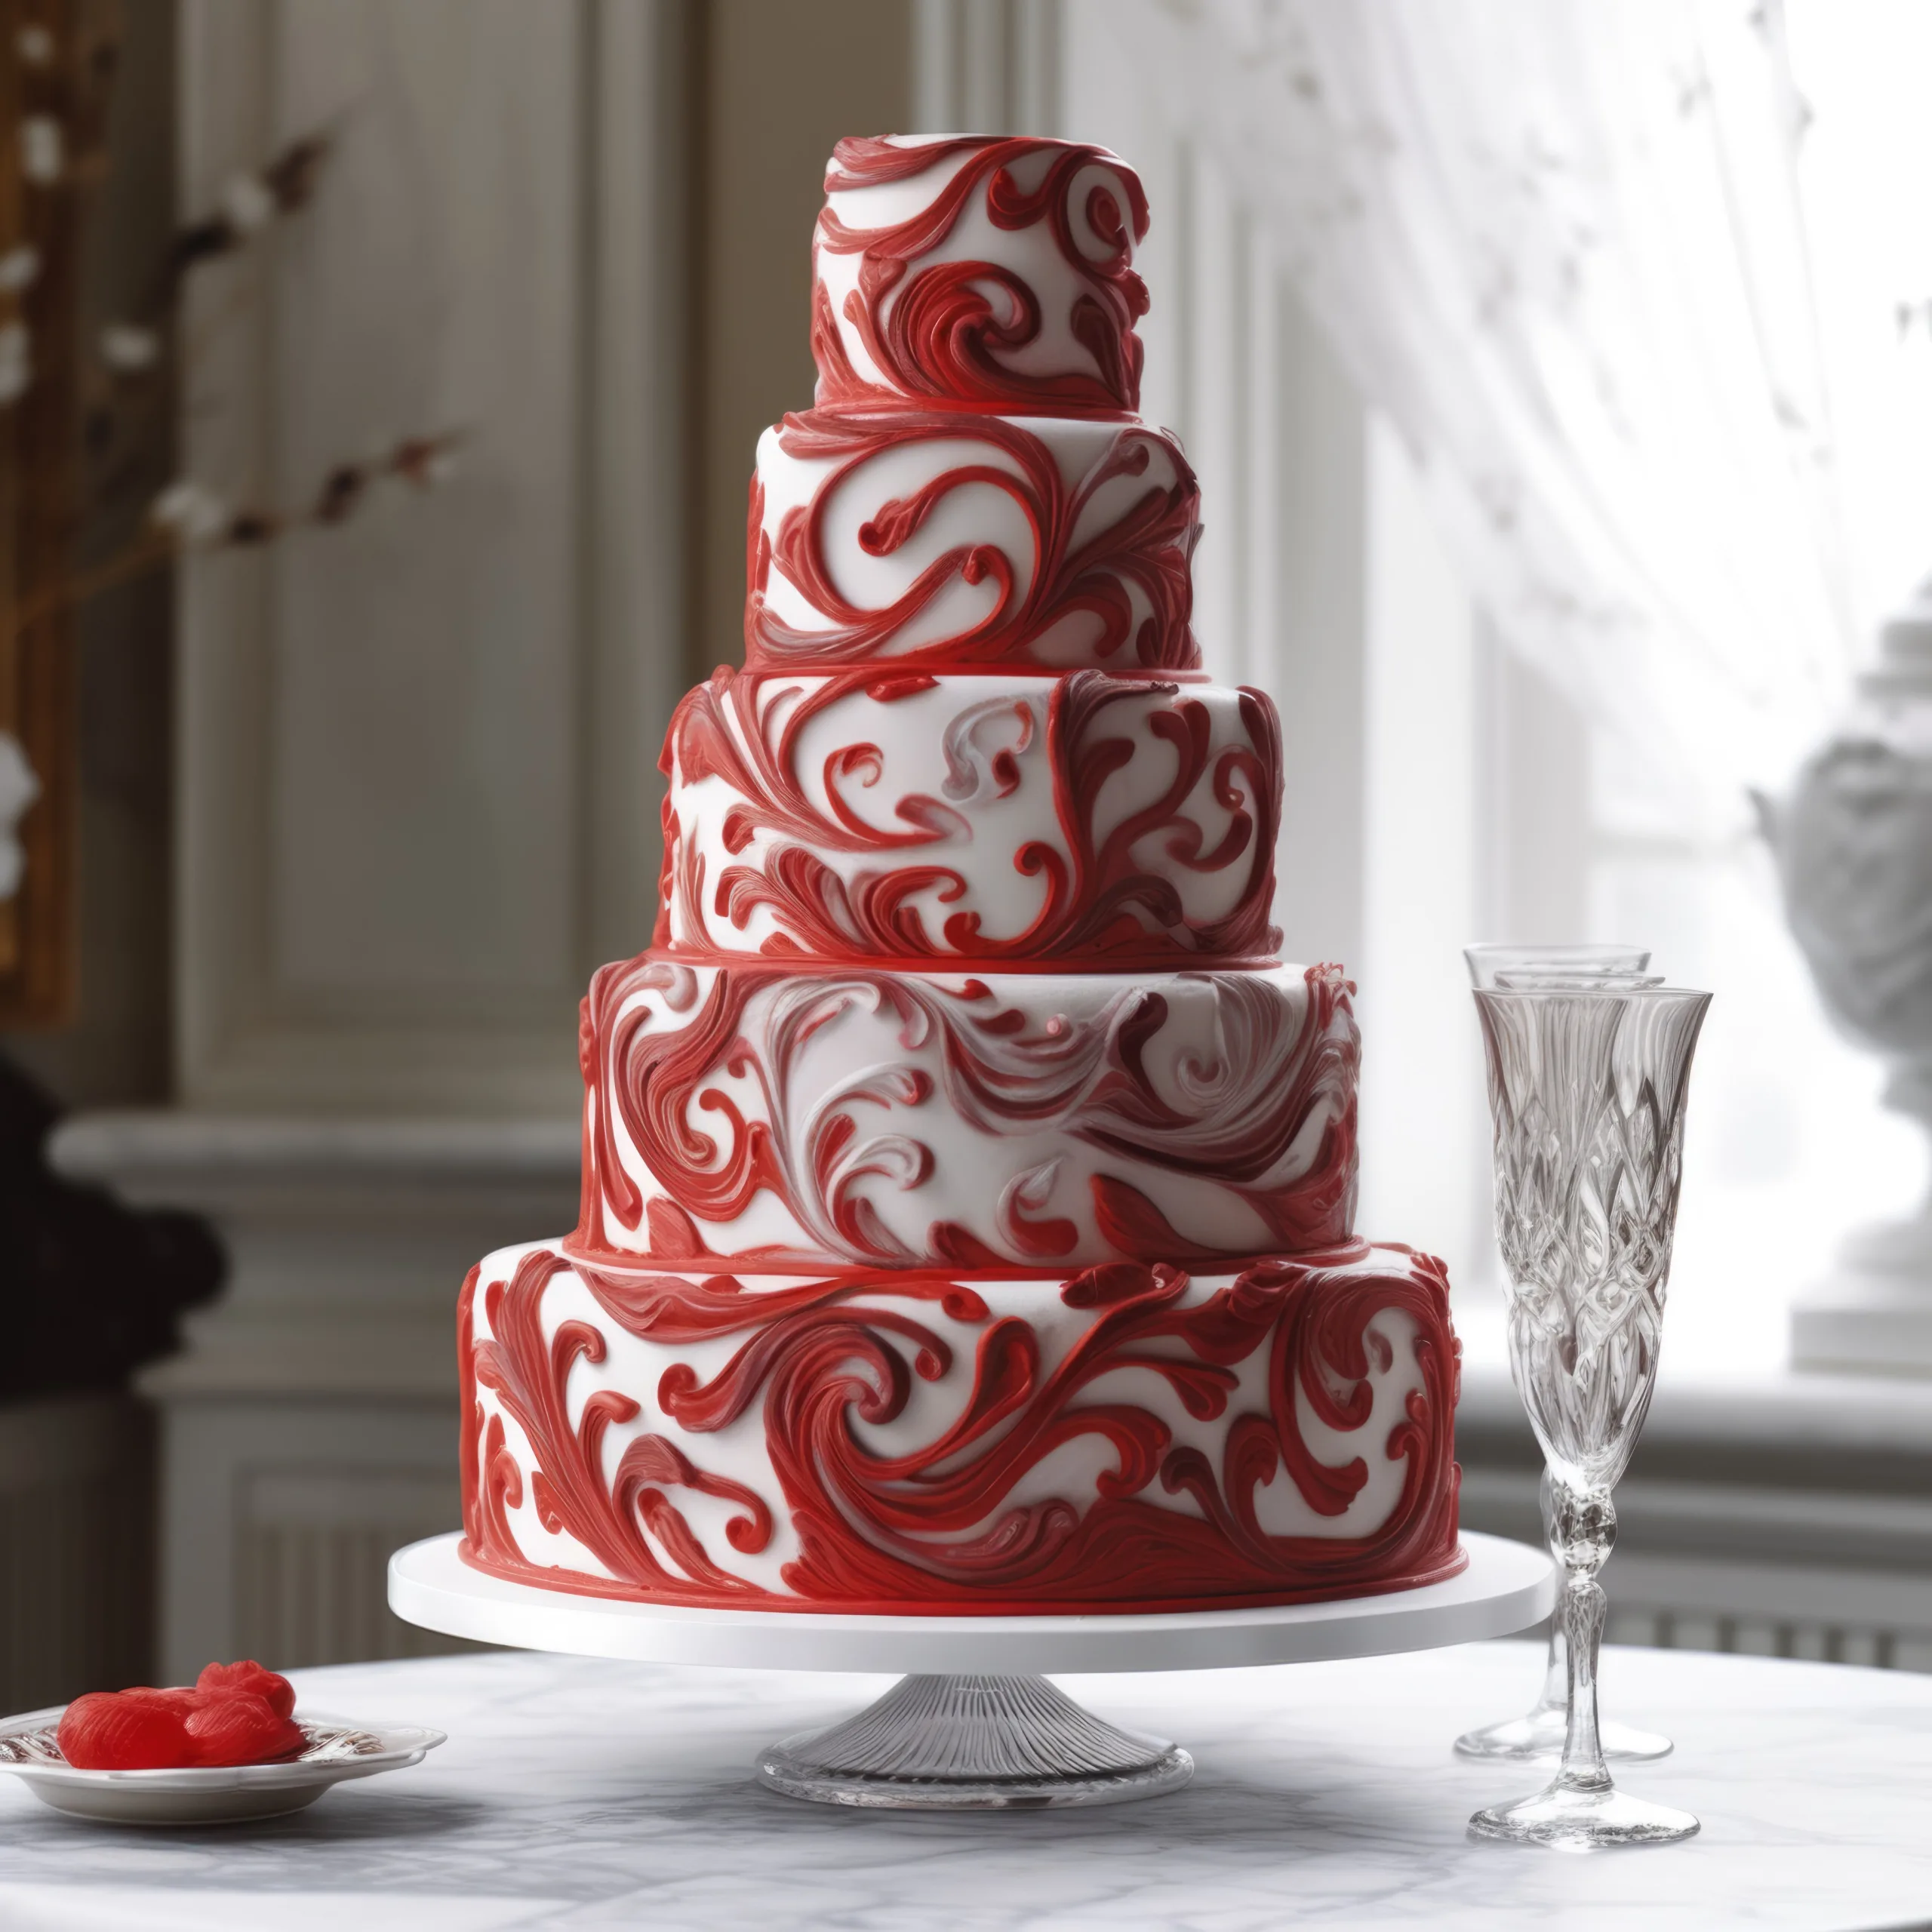 Orchardleigh Wedding Cake:a red and white wedding cake sitting on top of a table.